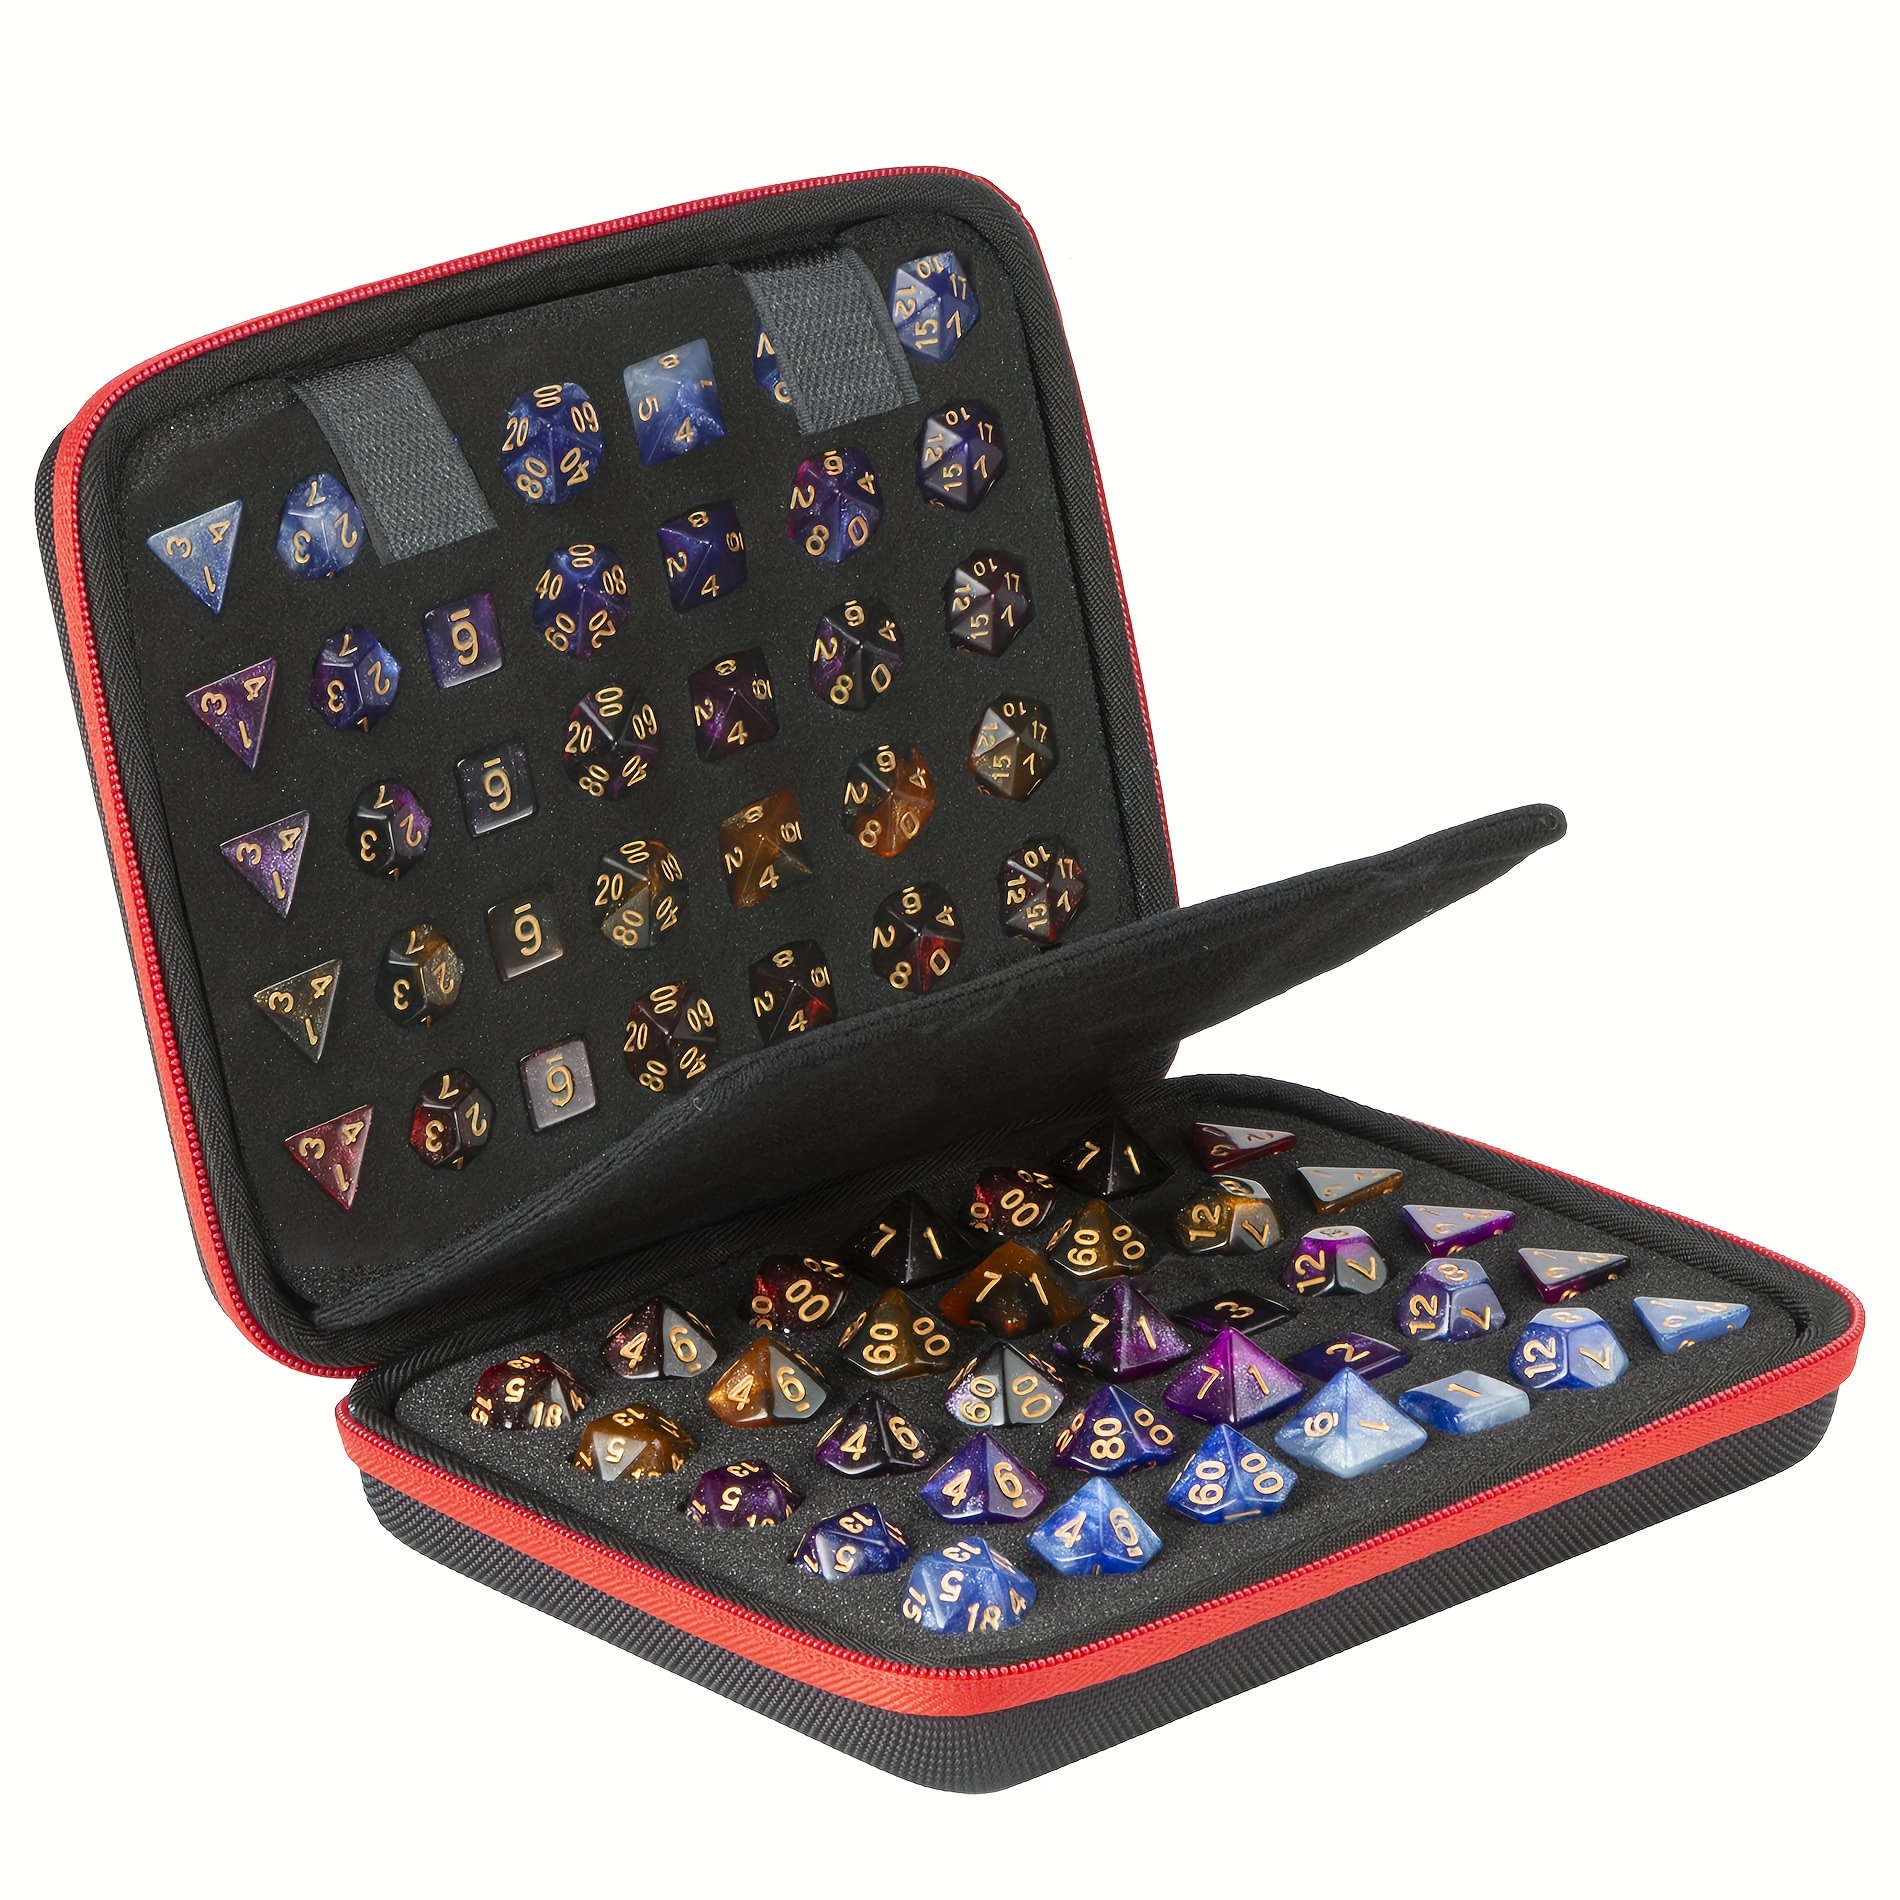 

Dice Storage Case Without Dice, Multi Face Dice Hand Bag For Games